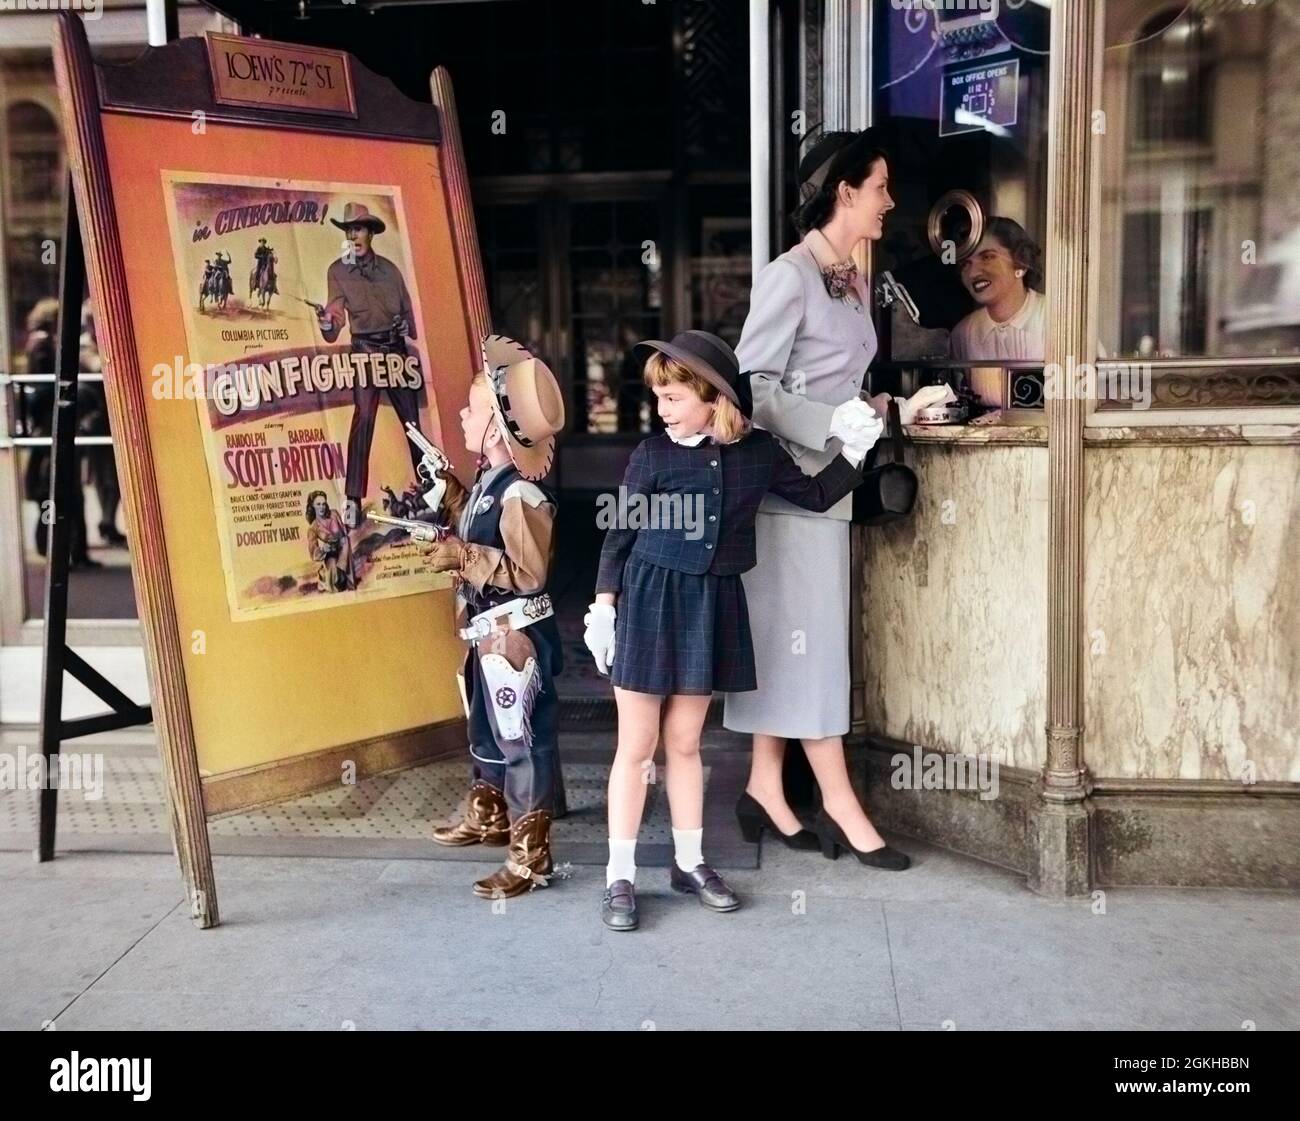 1950s MOTHER 2 CHILDREN BUYING TICKETS TO MOVIE MATINEE BOY WEARING COWBOY COSTUME - j5858c DEB001 HARS OUTDOOR COWBOY TOGETHER COSTUME 3 MOVIE PICTURE MOM CLOTHING SHOW CINEMA POSTER NOSTALGIC FILM PAIR GLOVE SUBURBAN URBAN THEATER RELATIONSHIP MOTHERS OLD TIME NOSTALGIA BROTHER MOVING SHOOTING OLD FASHION SISTER 1 JUVENILE STYLE COMMUNICATION CASHIER GUNS BILLBOARD WEST SONS TICKETS LIFESTYLE PARENTING FEMALES TICKET BROTHERS RELATION GROWNUP COPY SPACE PEOPLE CHILDREN FRIENDSHIP FULL-LENGTH LADIES SHOOT DAUGHTERS PERSONS INSPIRATION GROWN-UP CHARACTER MALES WESTERN ENTERTAINMENT SIBLINGS Stock Photo